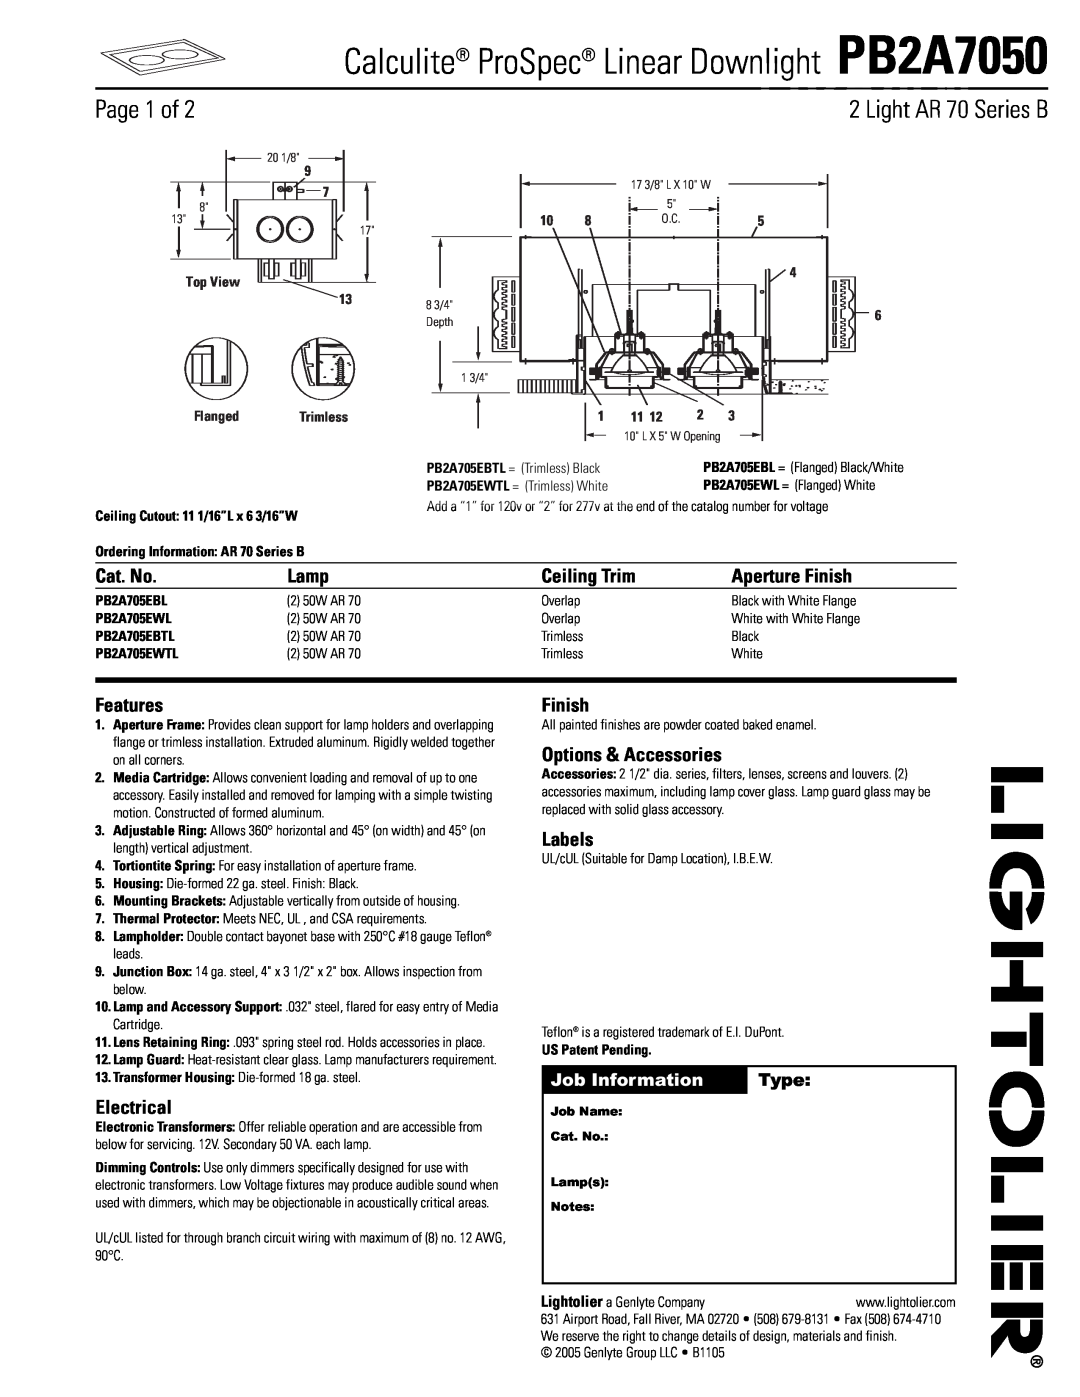 Lightolier manual Calculite ProSpec Linear Downlight PB2A7050, Page 1 of, Light AR 70 Series B, Cat. No, Lamp, Features 